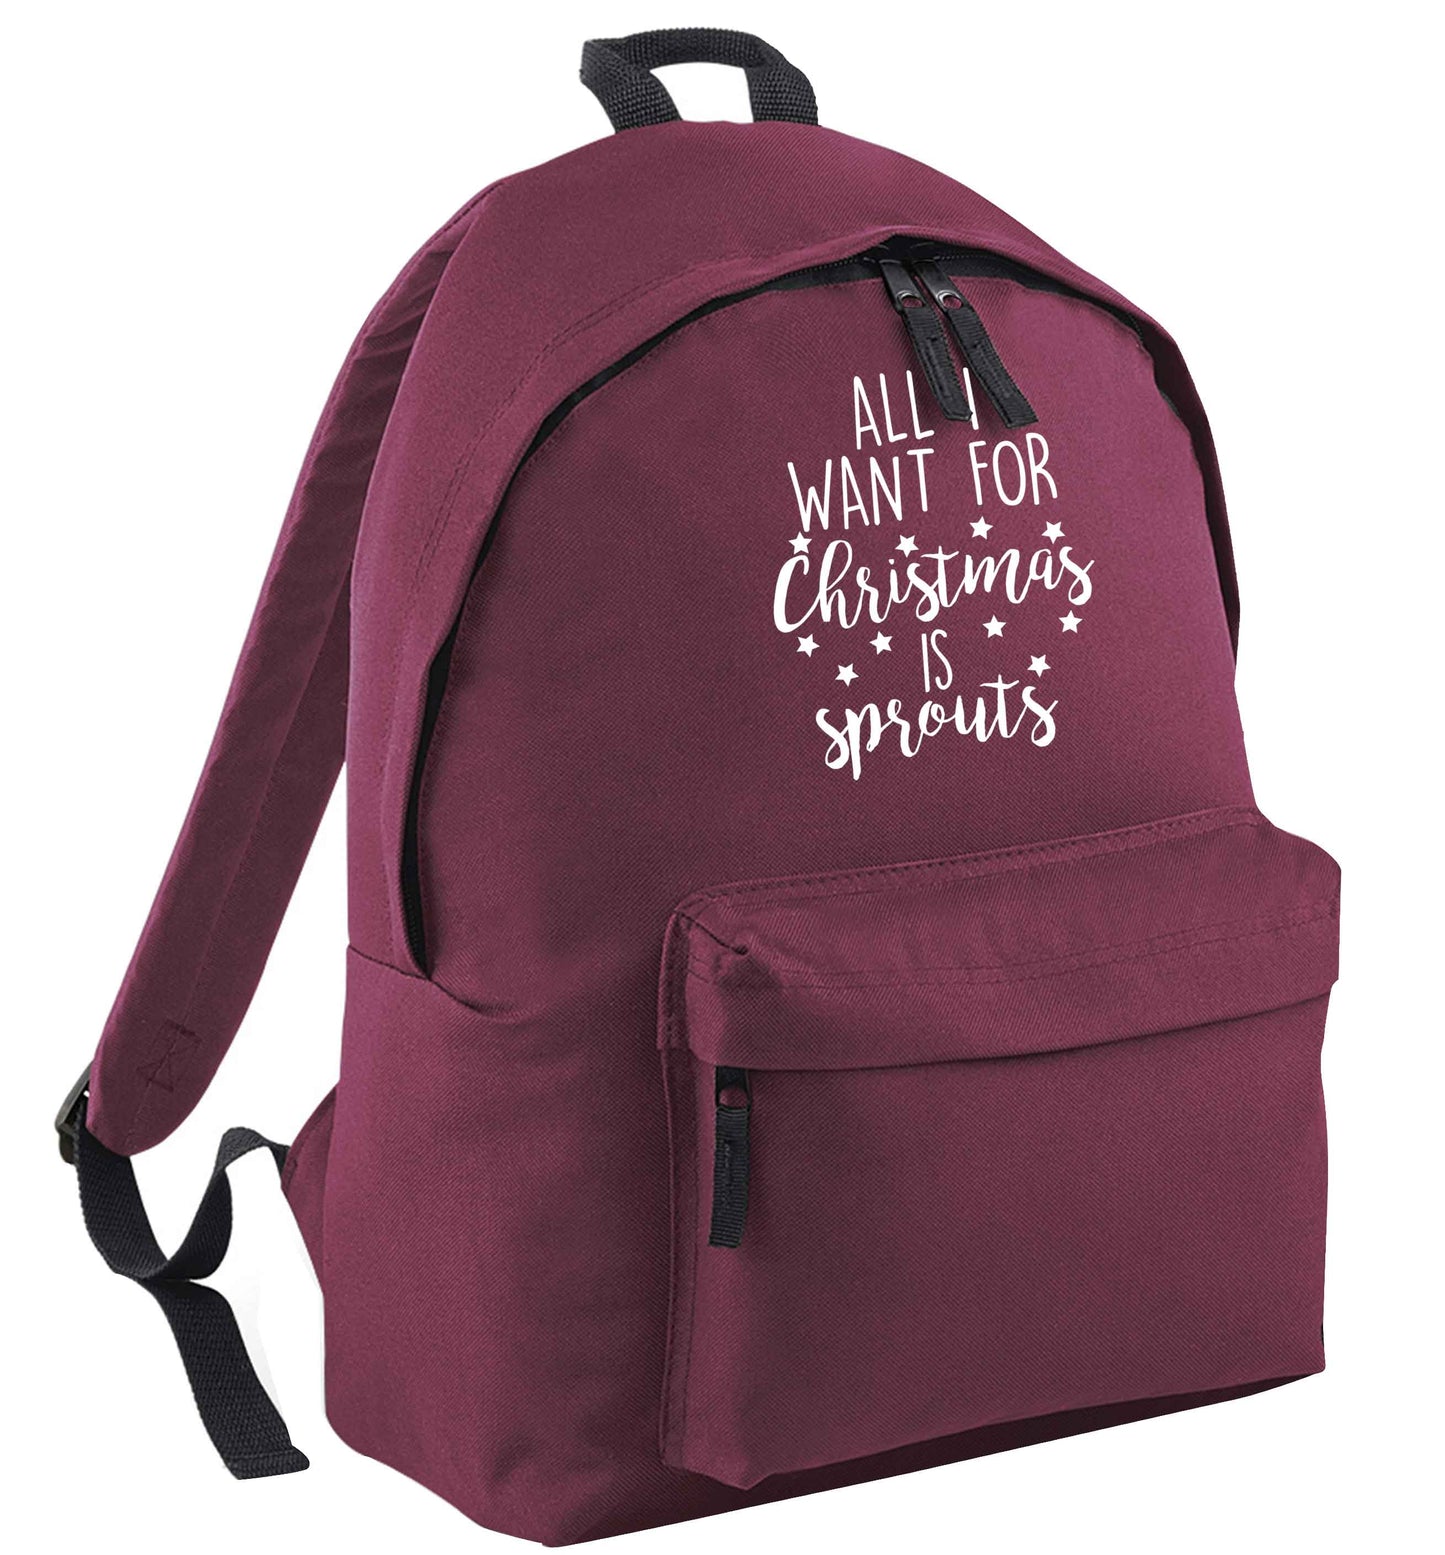 All I want for Christmas is sprouts | Children's backpack